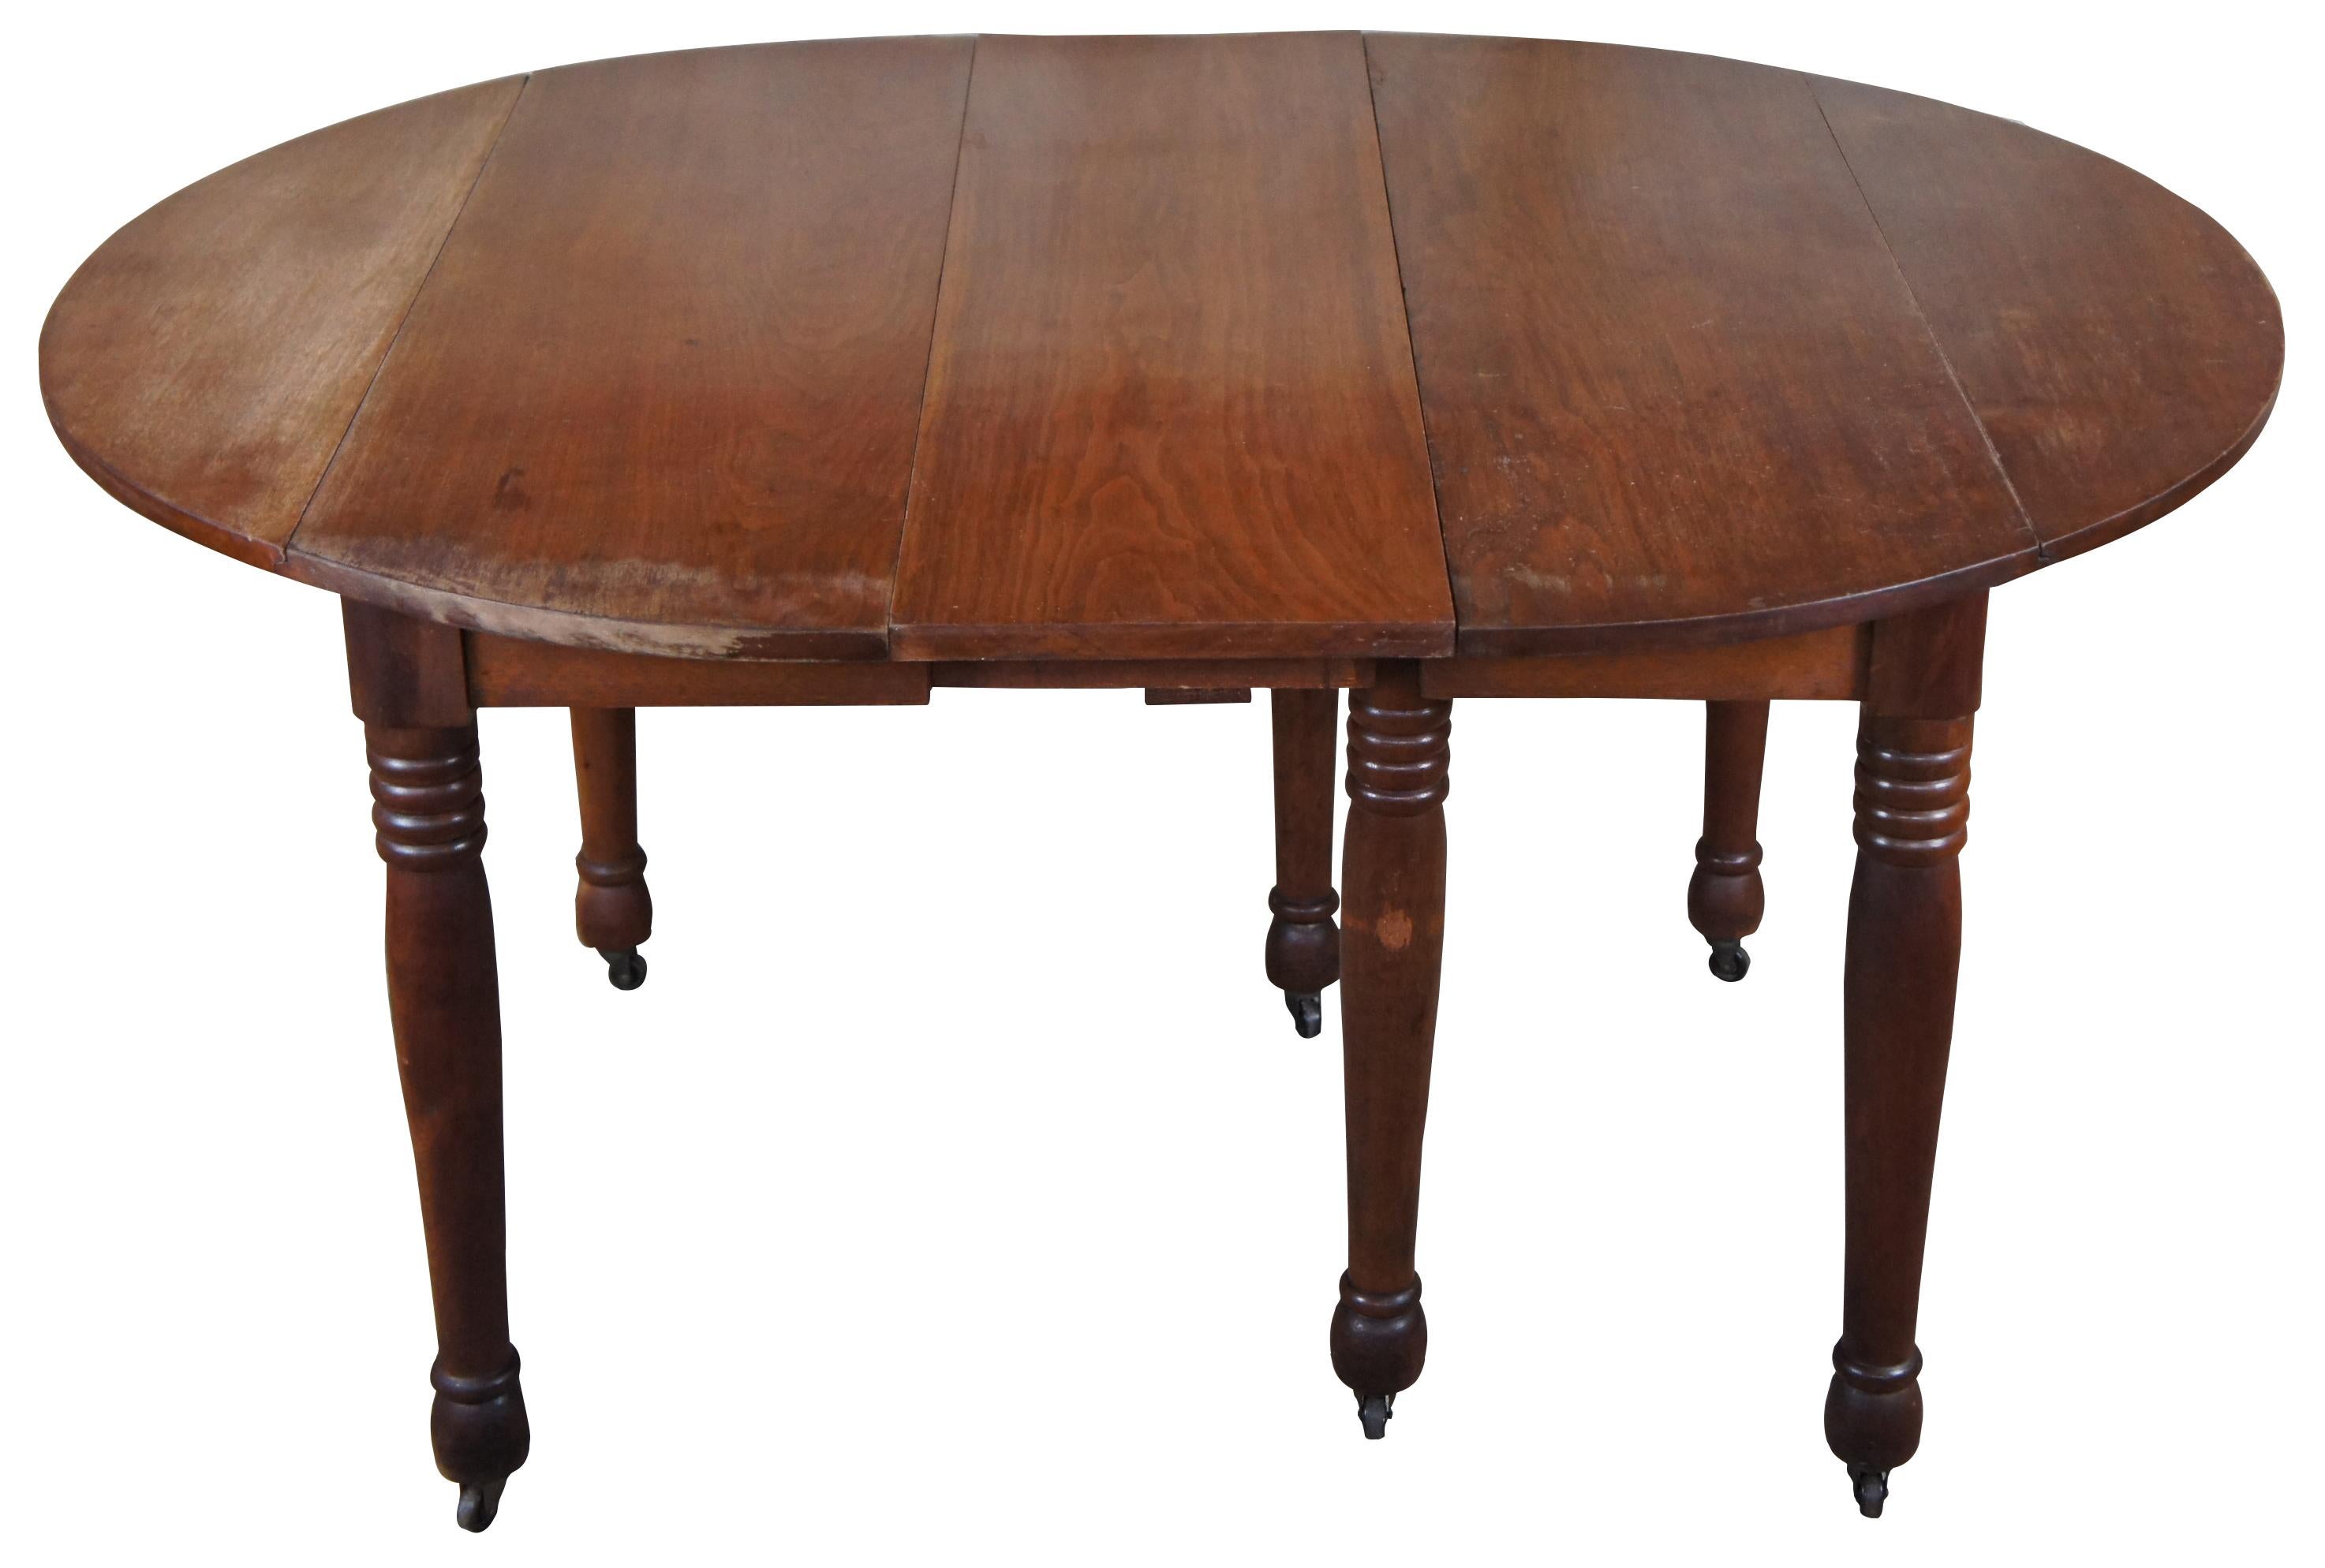 Antique walnut extendable dining or breakfast table featuring oval form with six legs and multiple extending leaves and drop leaves.

Measures: 39